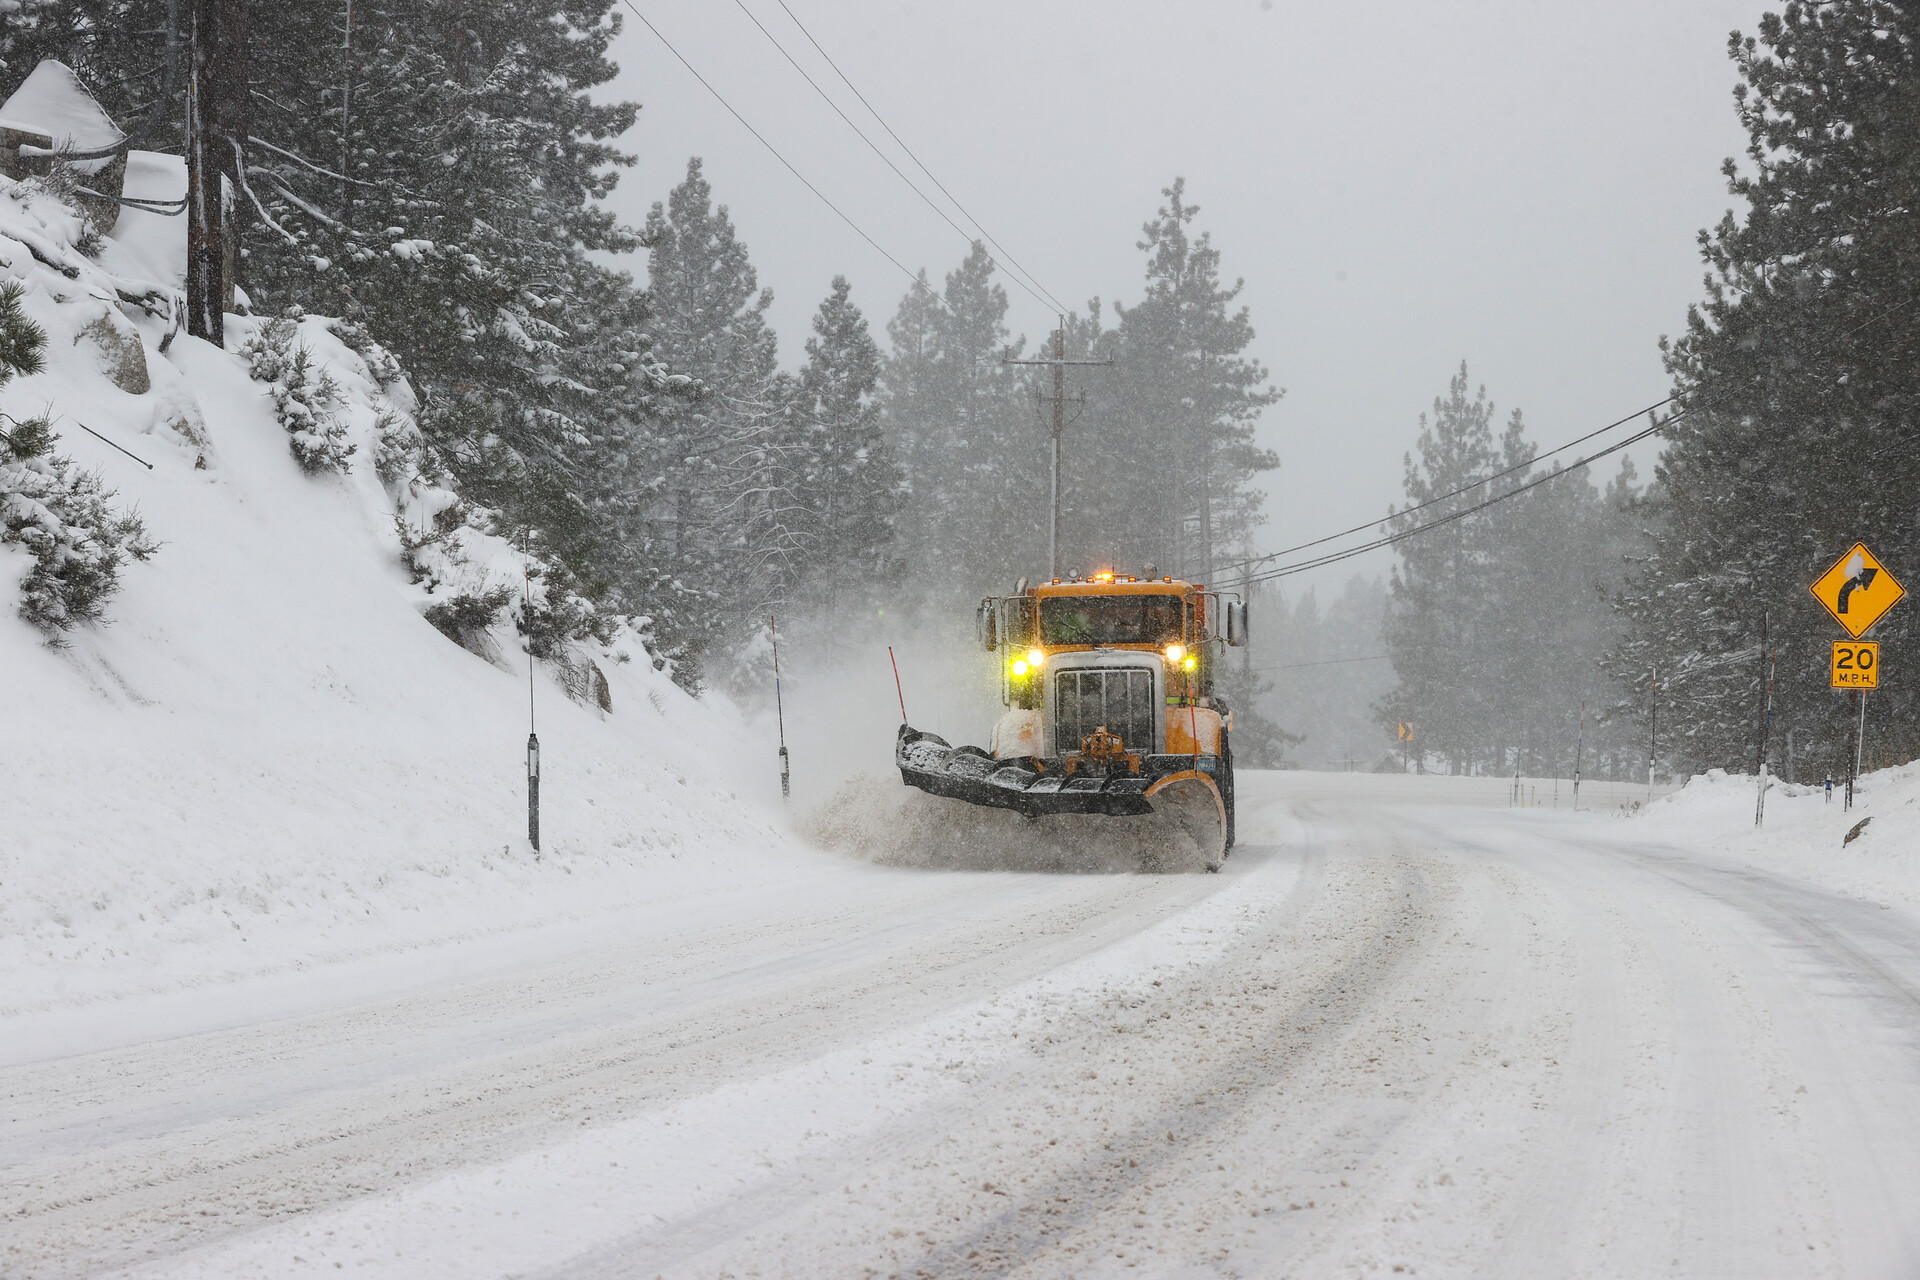 A bright yellow snowplow drives on a snowy country road surrounded by pine trees.